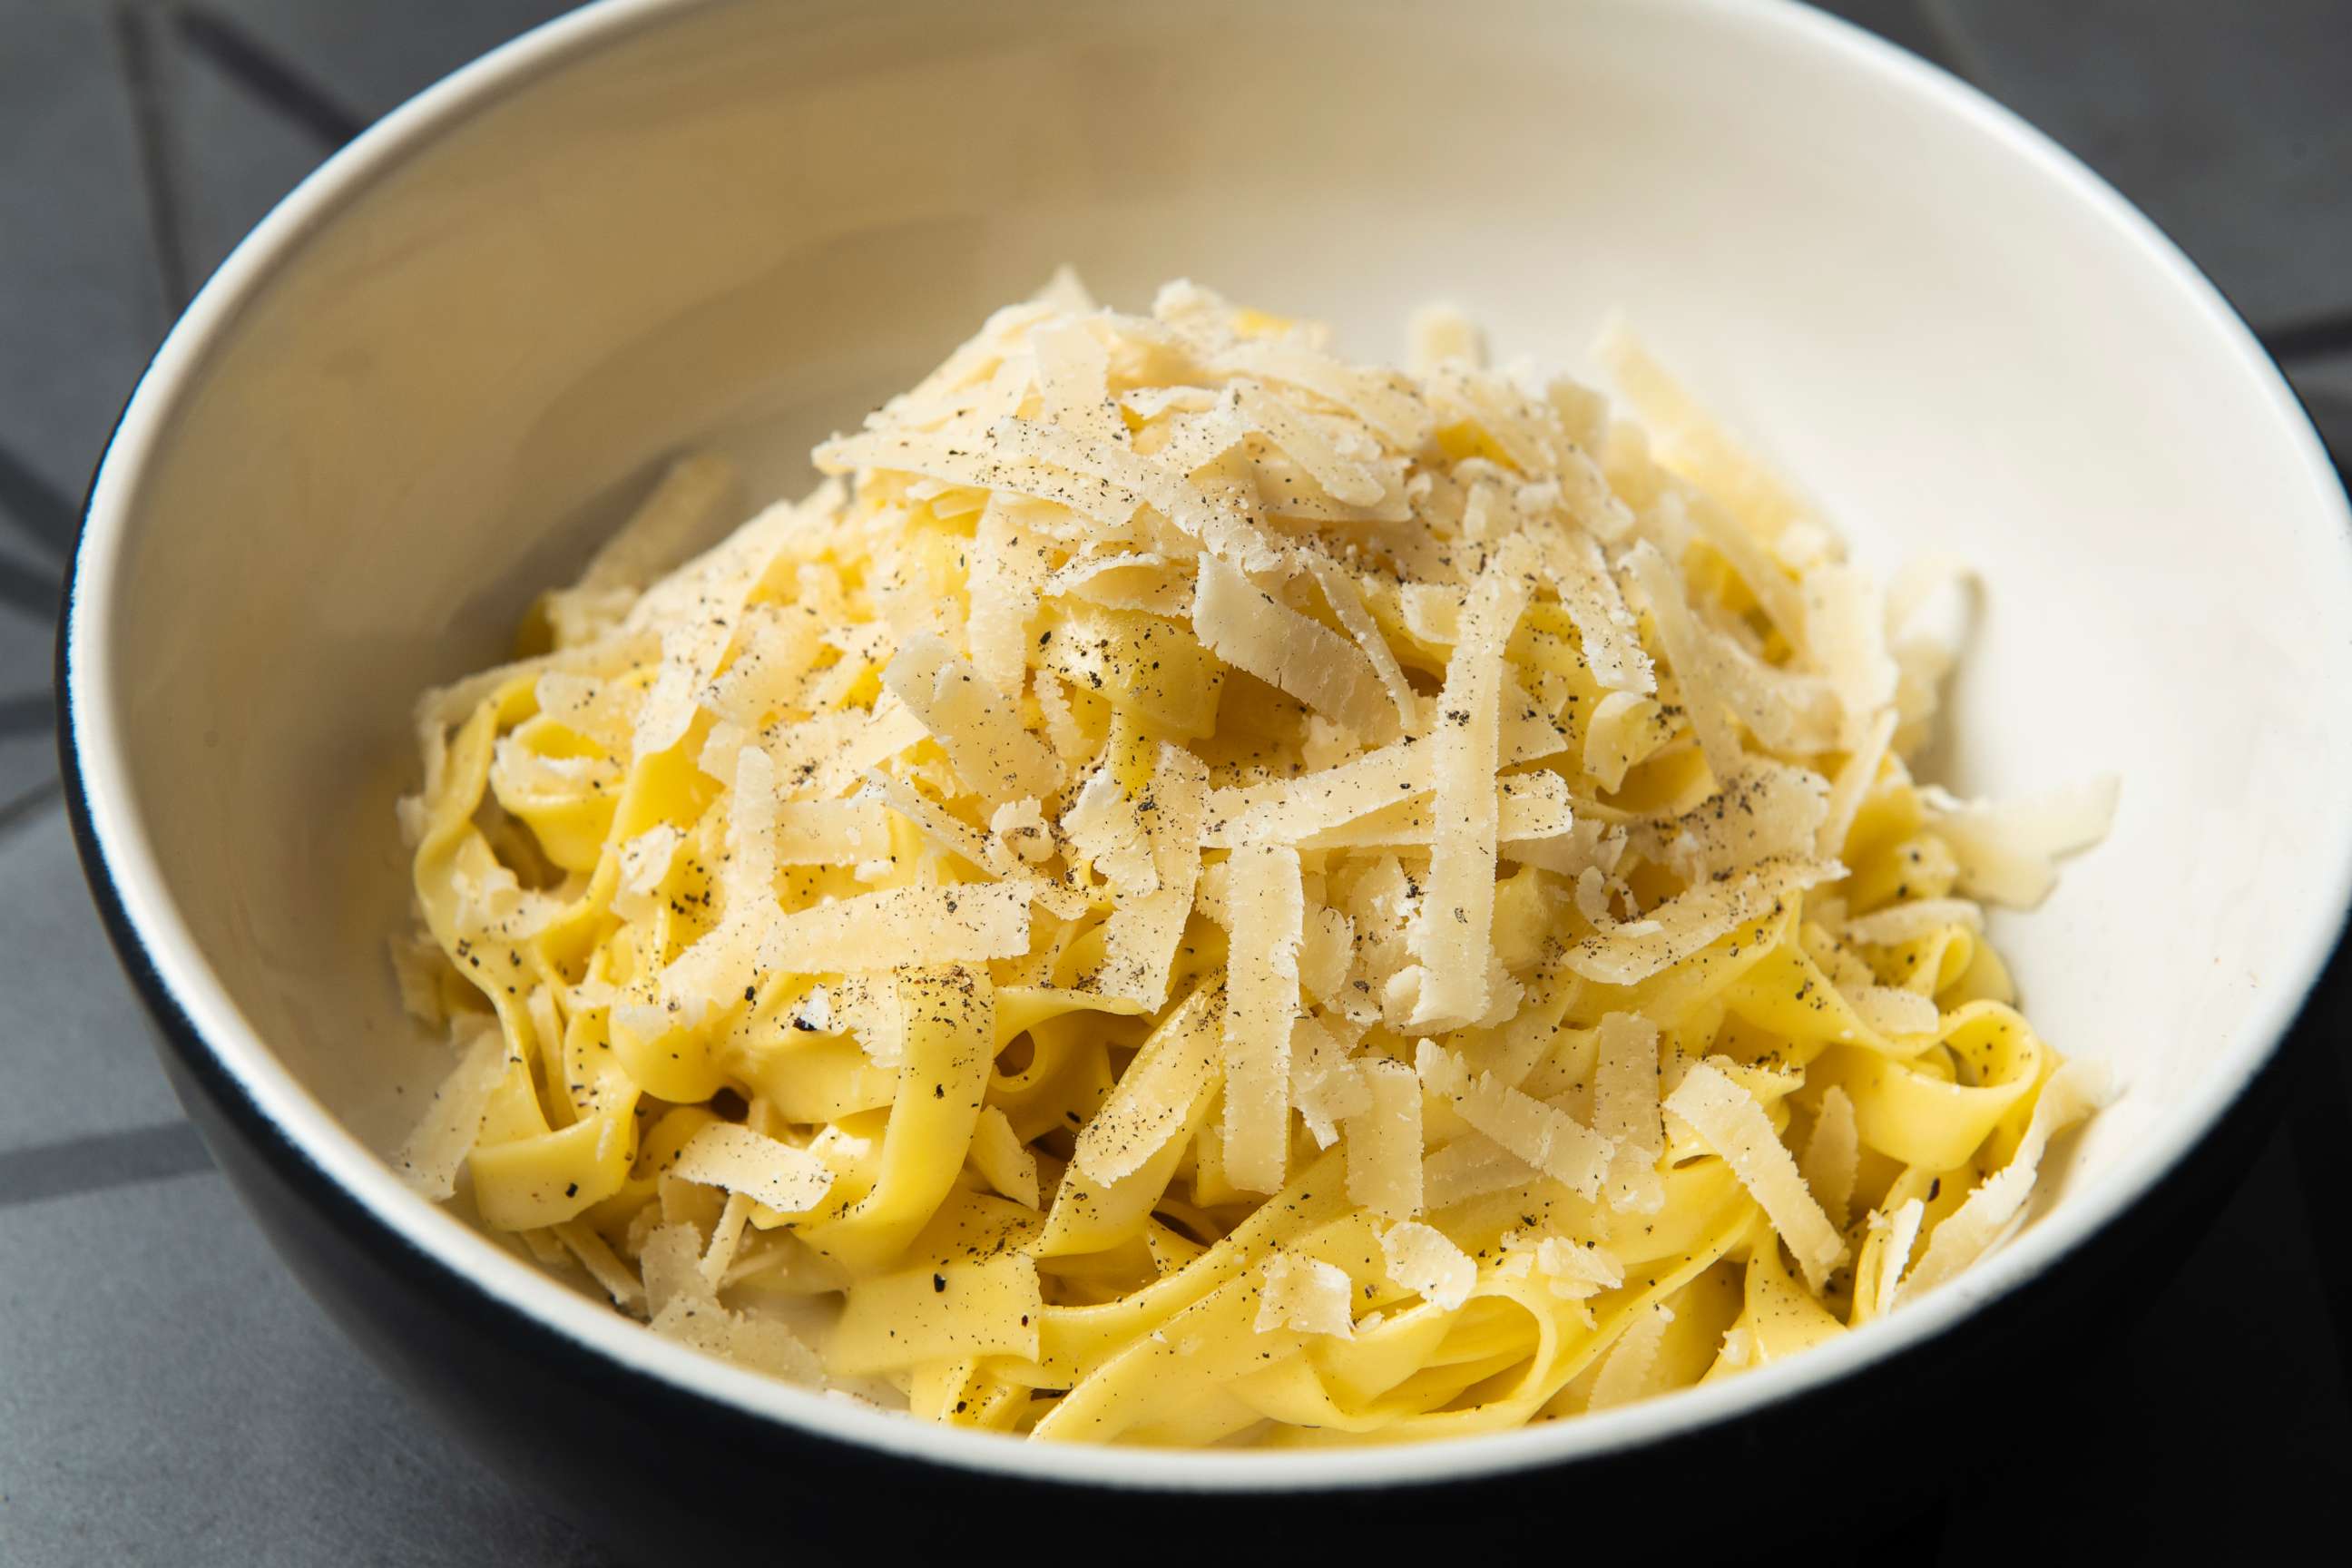 PHOTO: Chef Missy Robbins' fettuccine with buffalo butter and Parmigiano Reggiano.